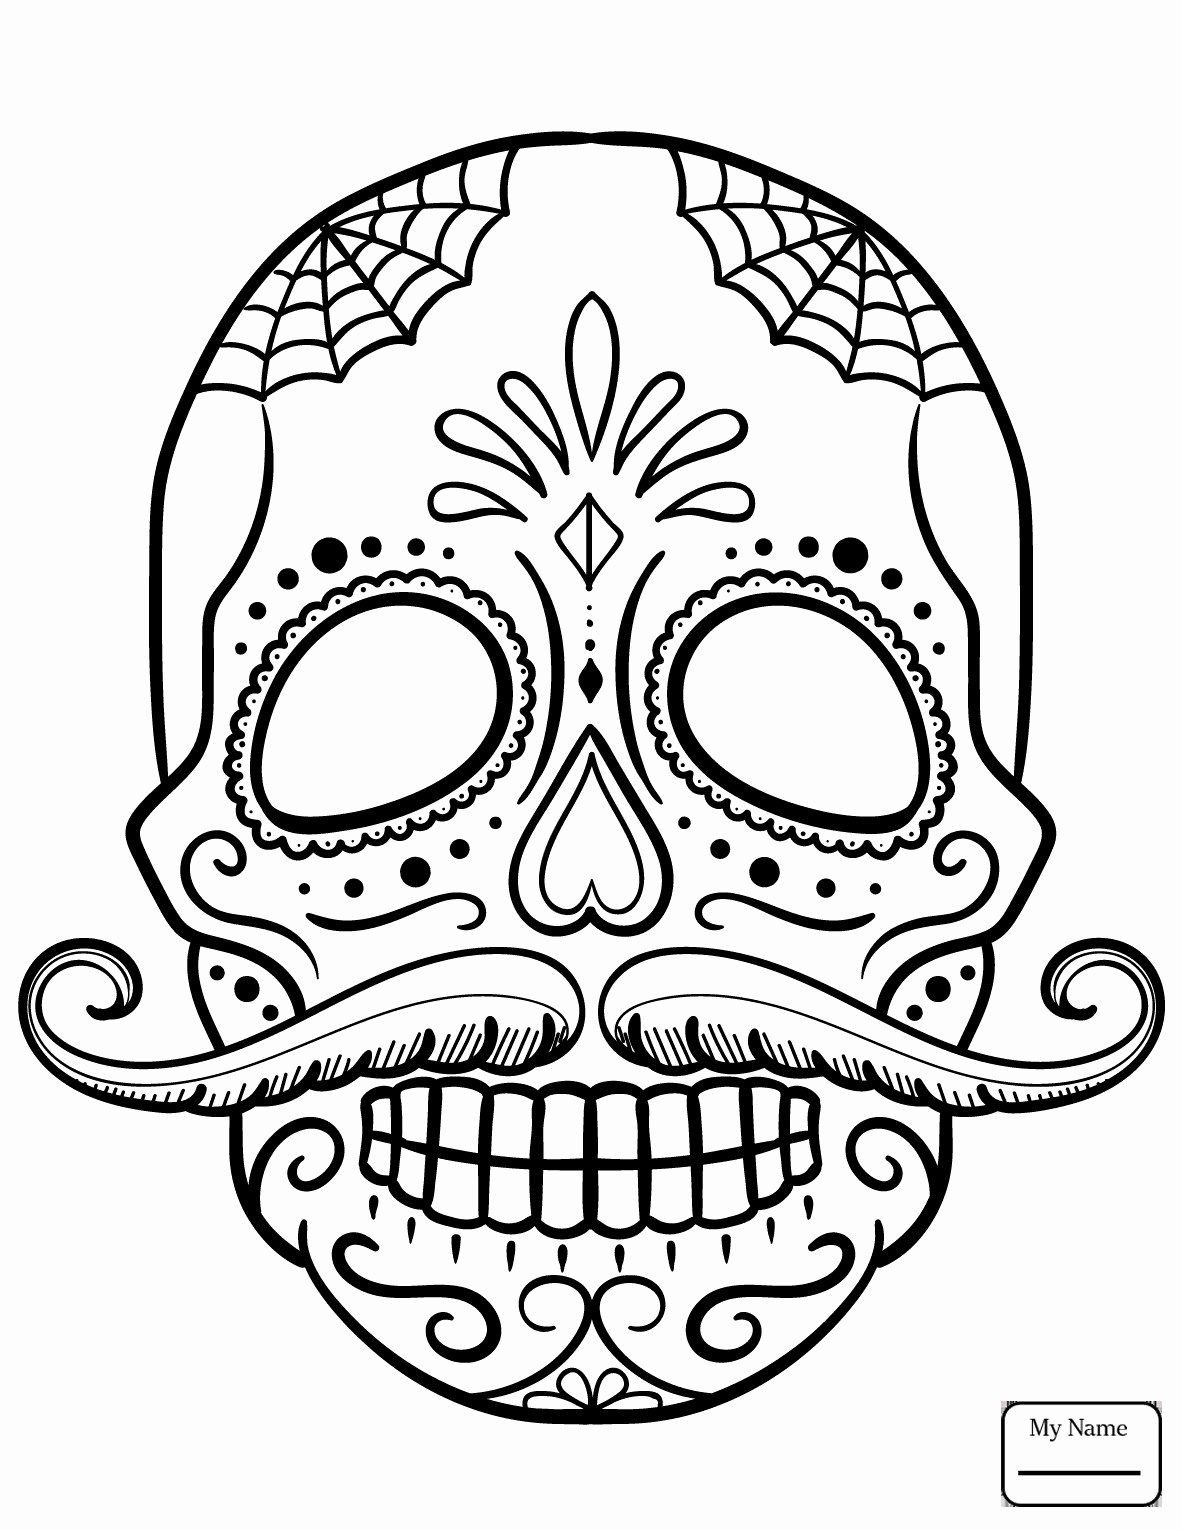 coloring : Sugar Skull Coloring Book Beautiful Animal Family Coloring Pages  In 2020 With Images Sugar Skull Coloring Book ~ queens